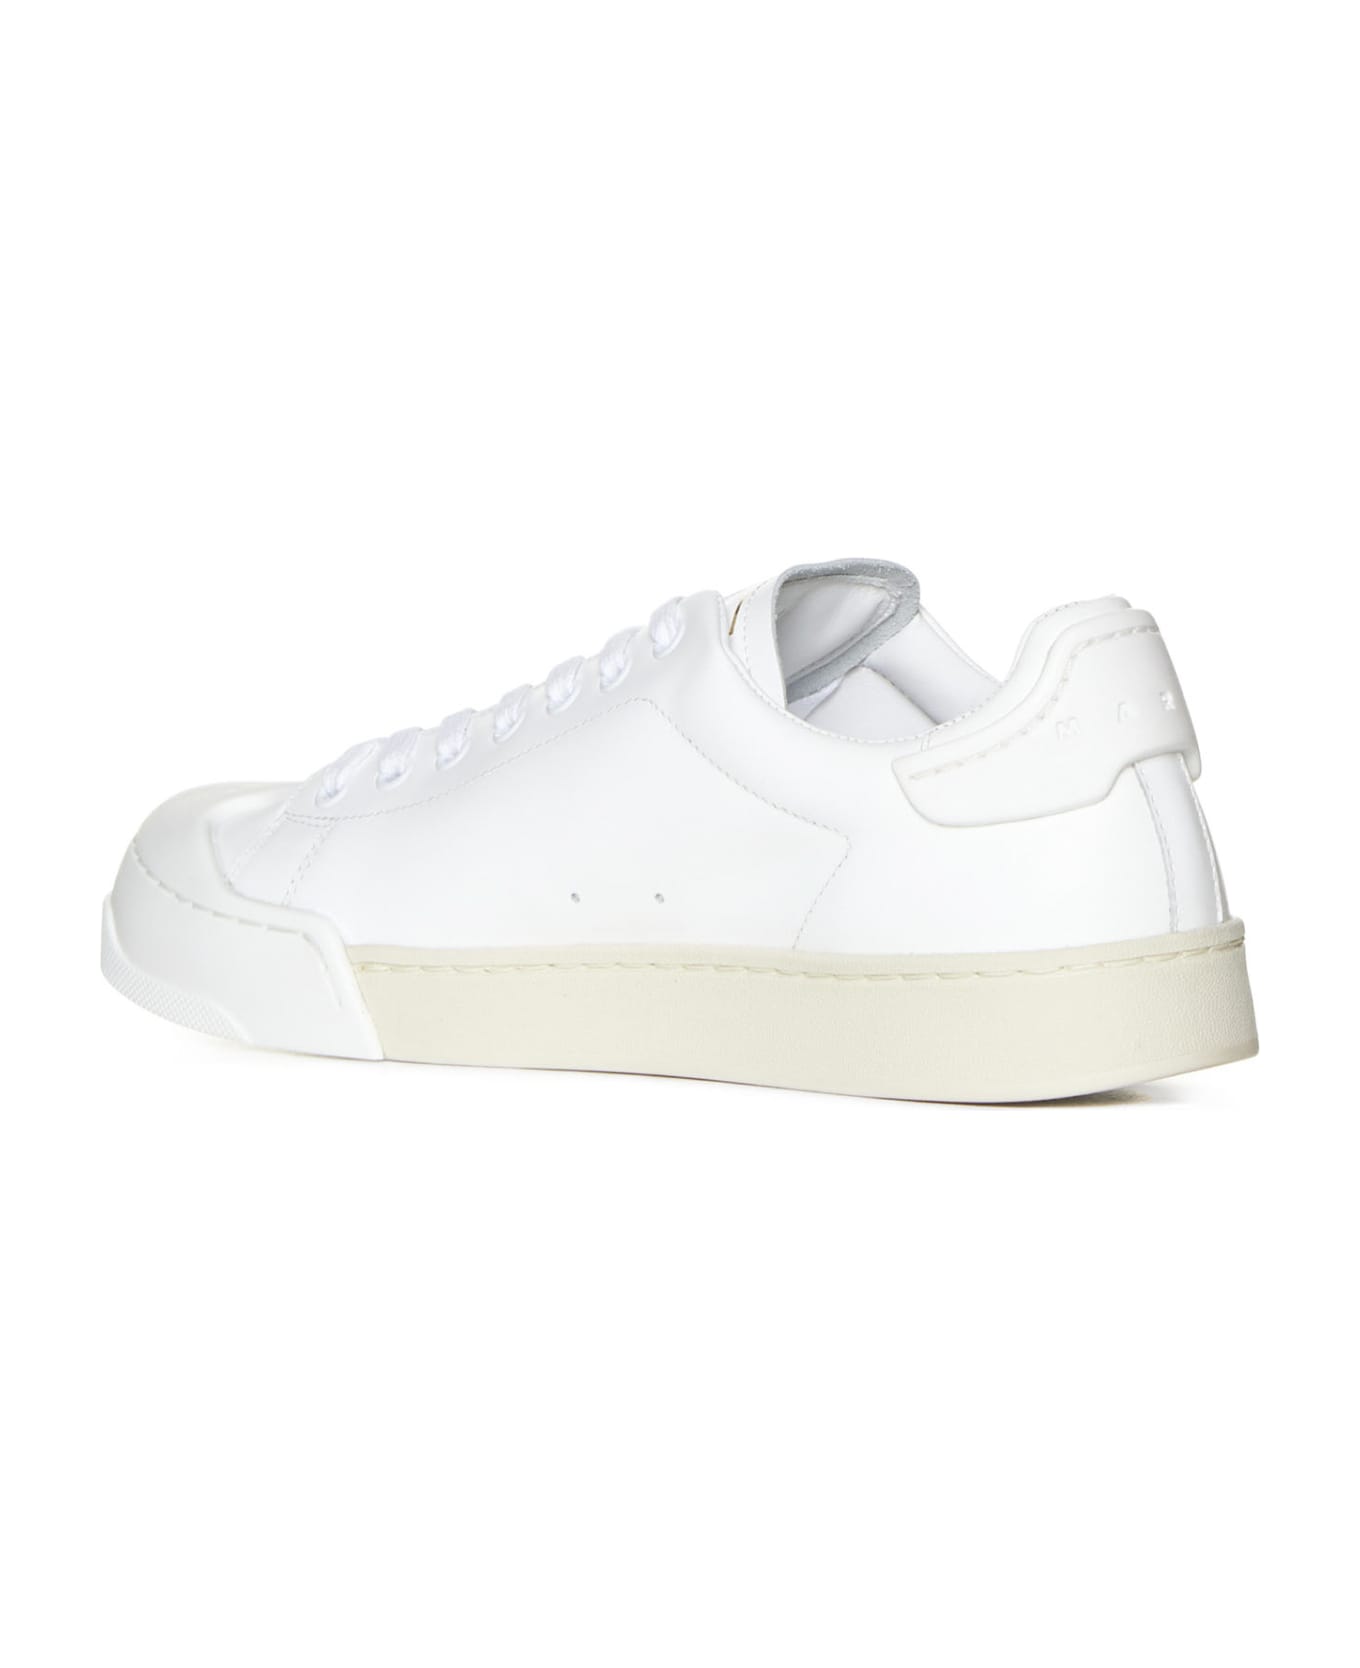 Marni Sneakers - Lily white/lily white スニーカー